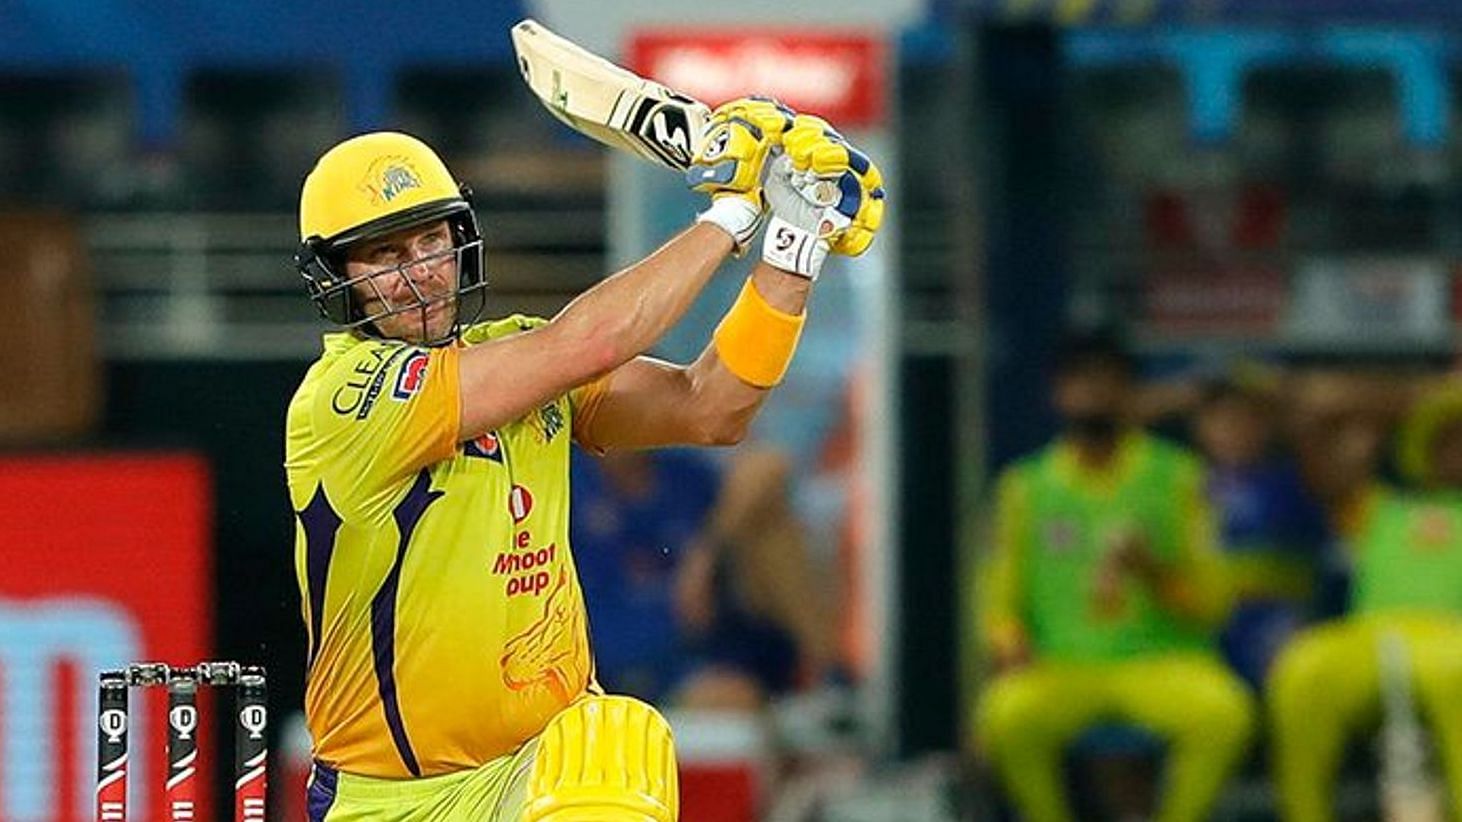 Scoring 1,252 runs in 43 games for the franchise, Shane Watson has played some of the best knocks in the IPL for CSK.